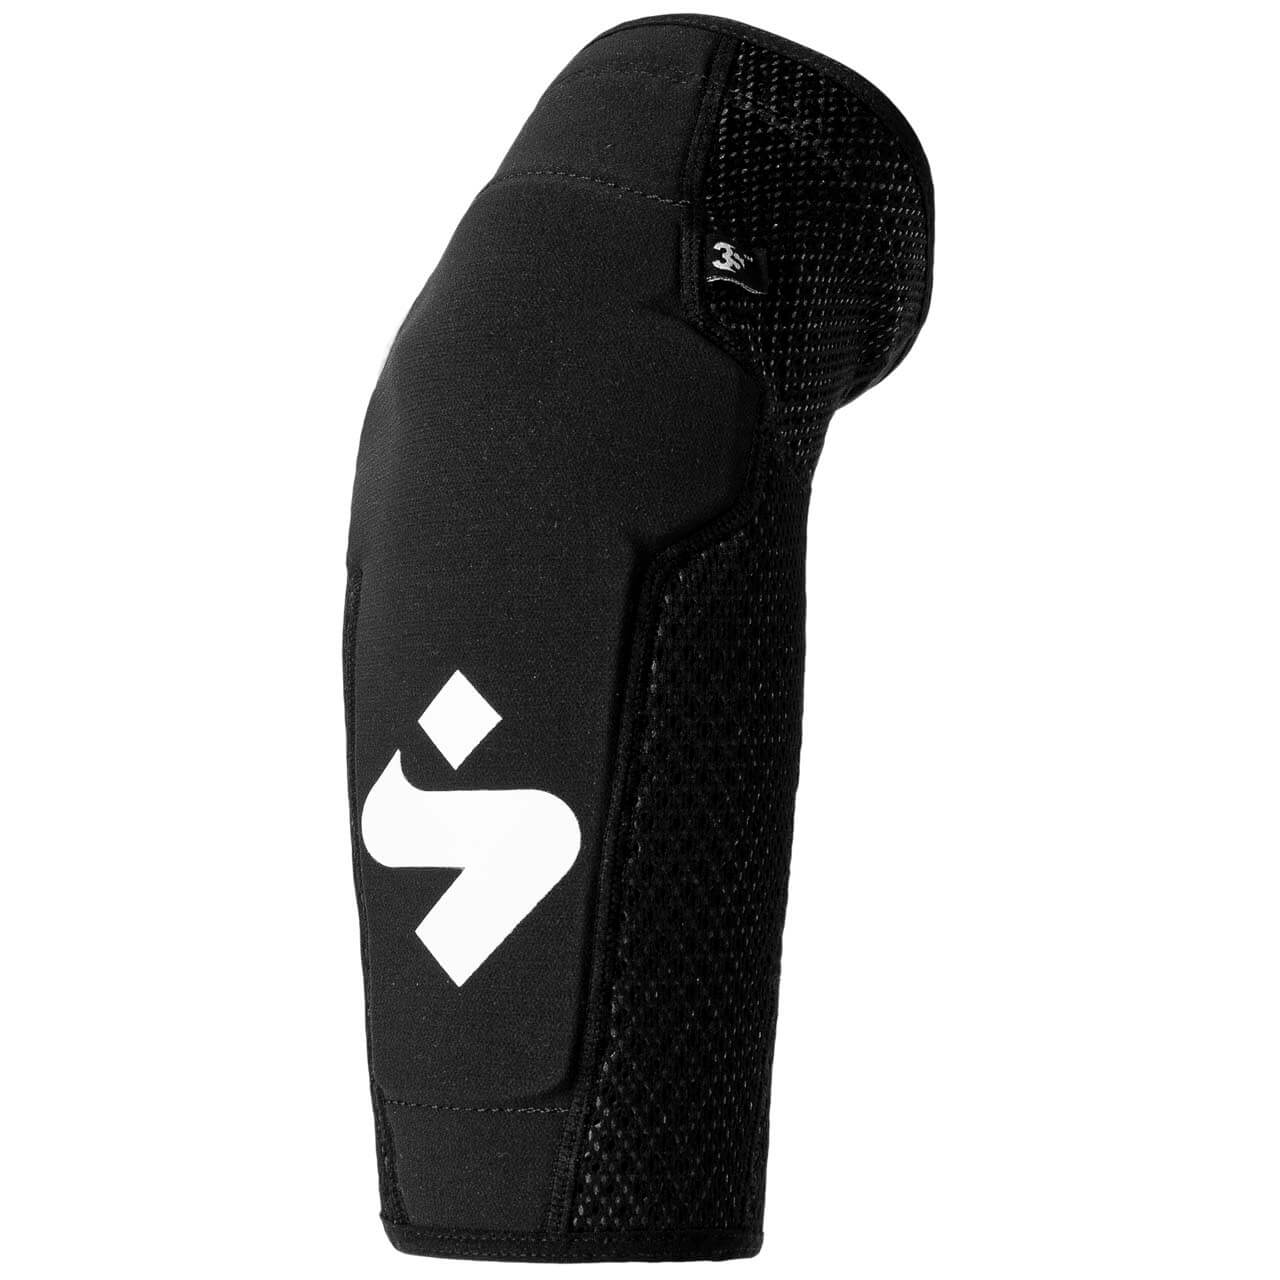 Sweet Protection Knee Guards Light - Black, XS